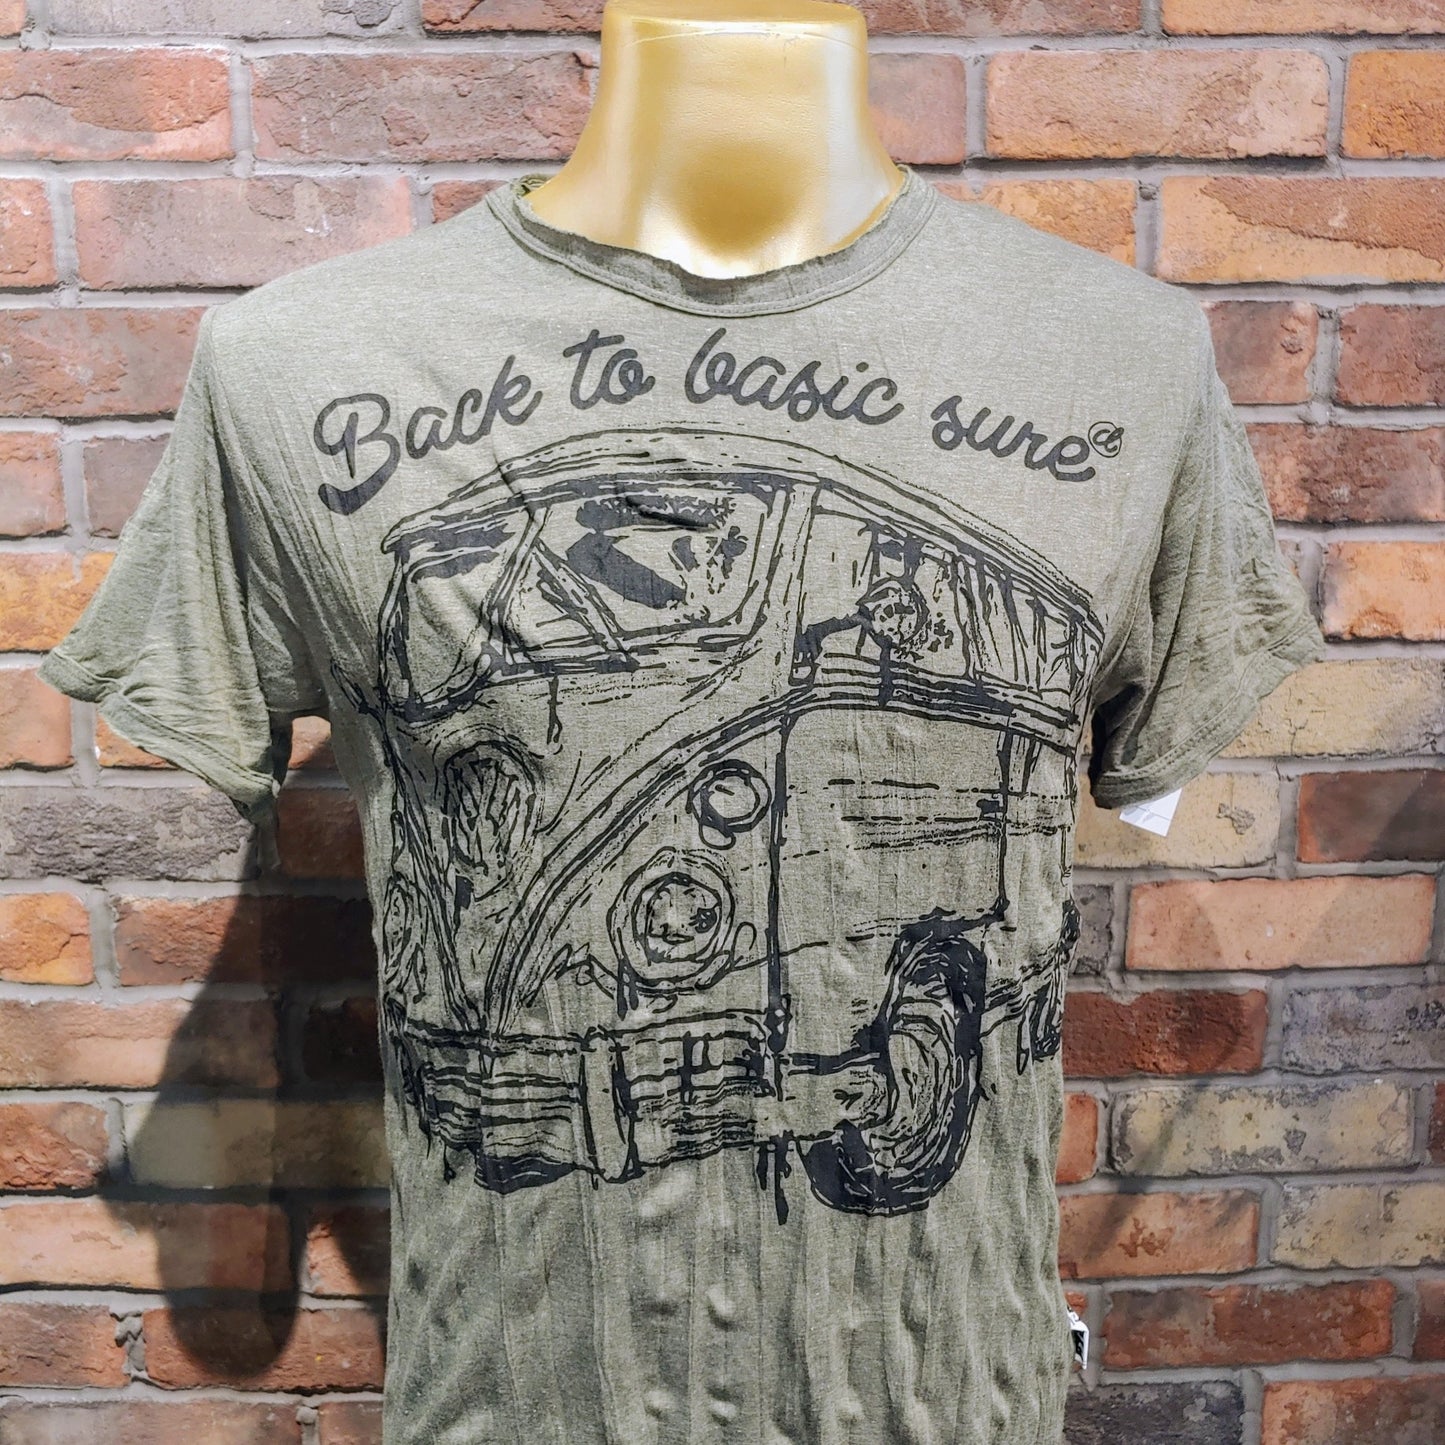 Back to Basics Love Bus T-shirt By Sure